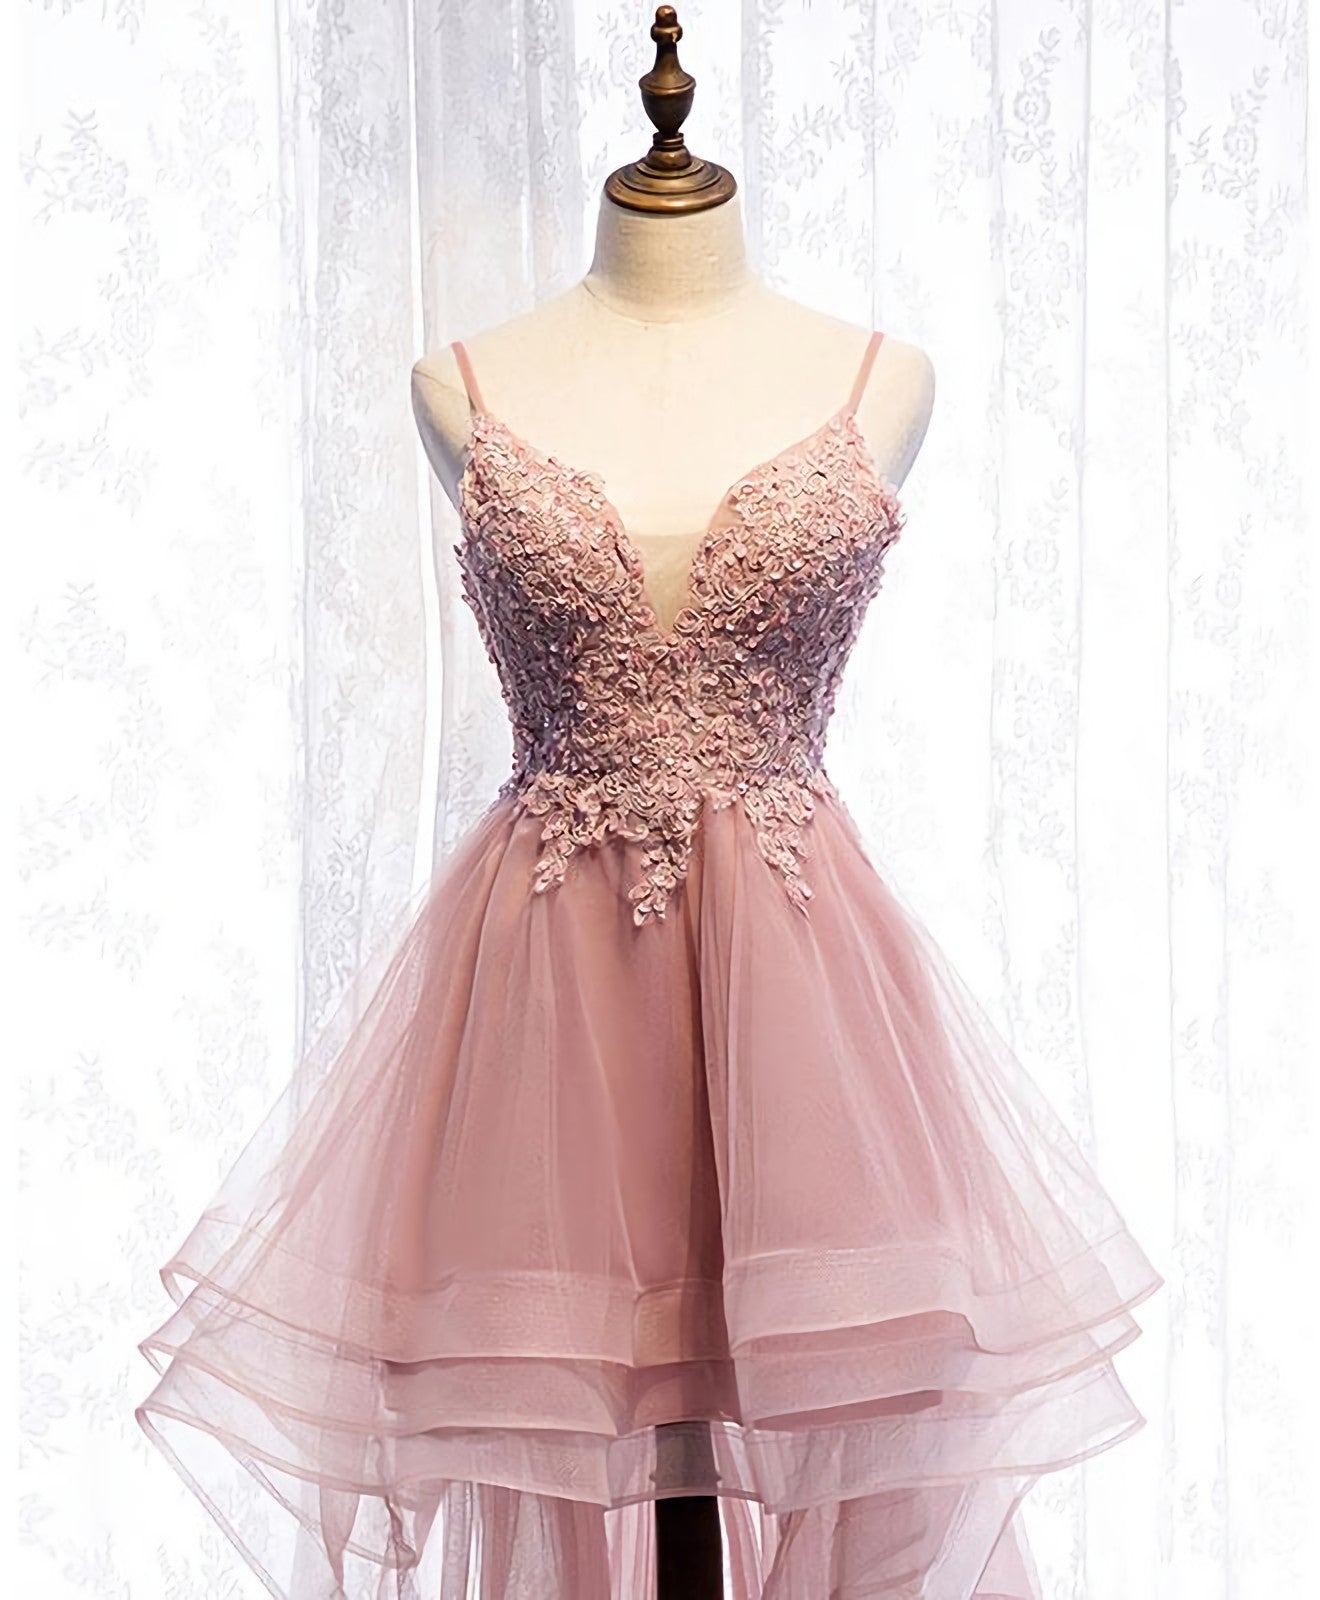 Party Dress Shop, Pink Tulle Lace High Low Prom Dress, Pink Homecoming Dress, 1